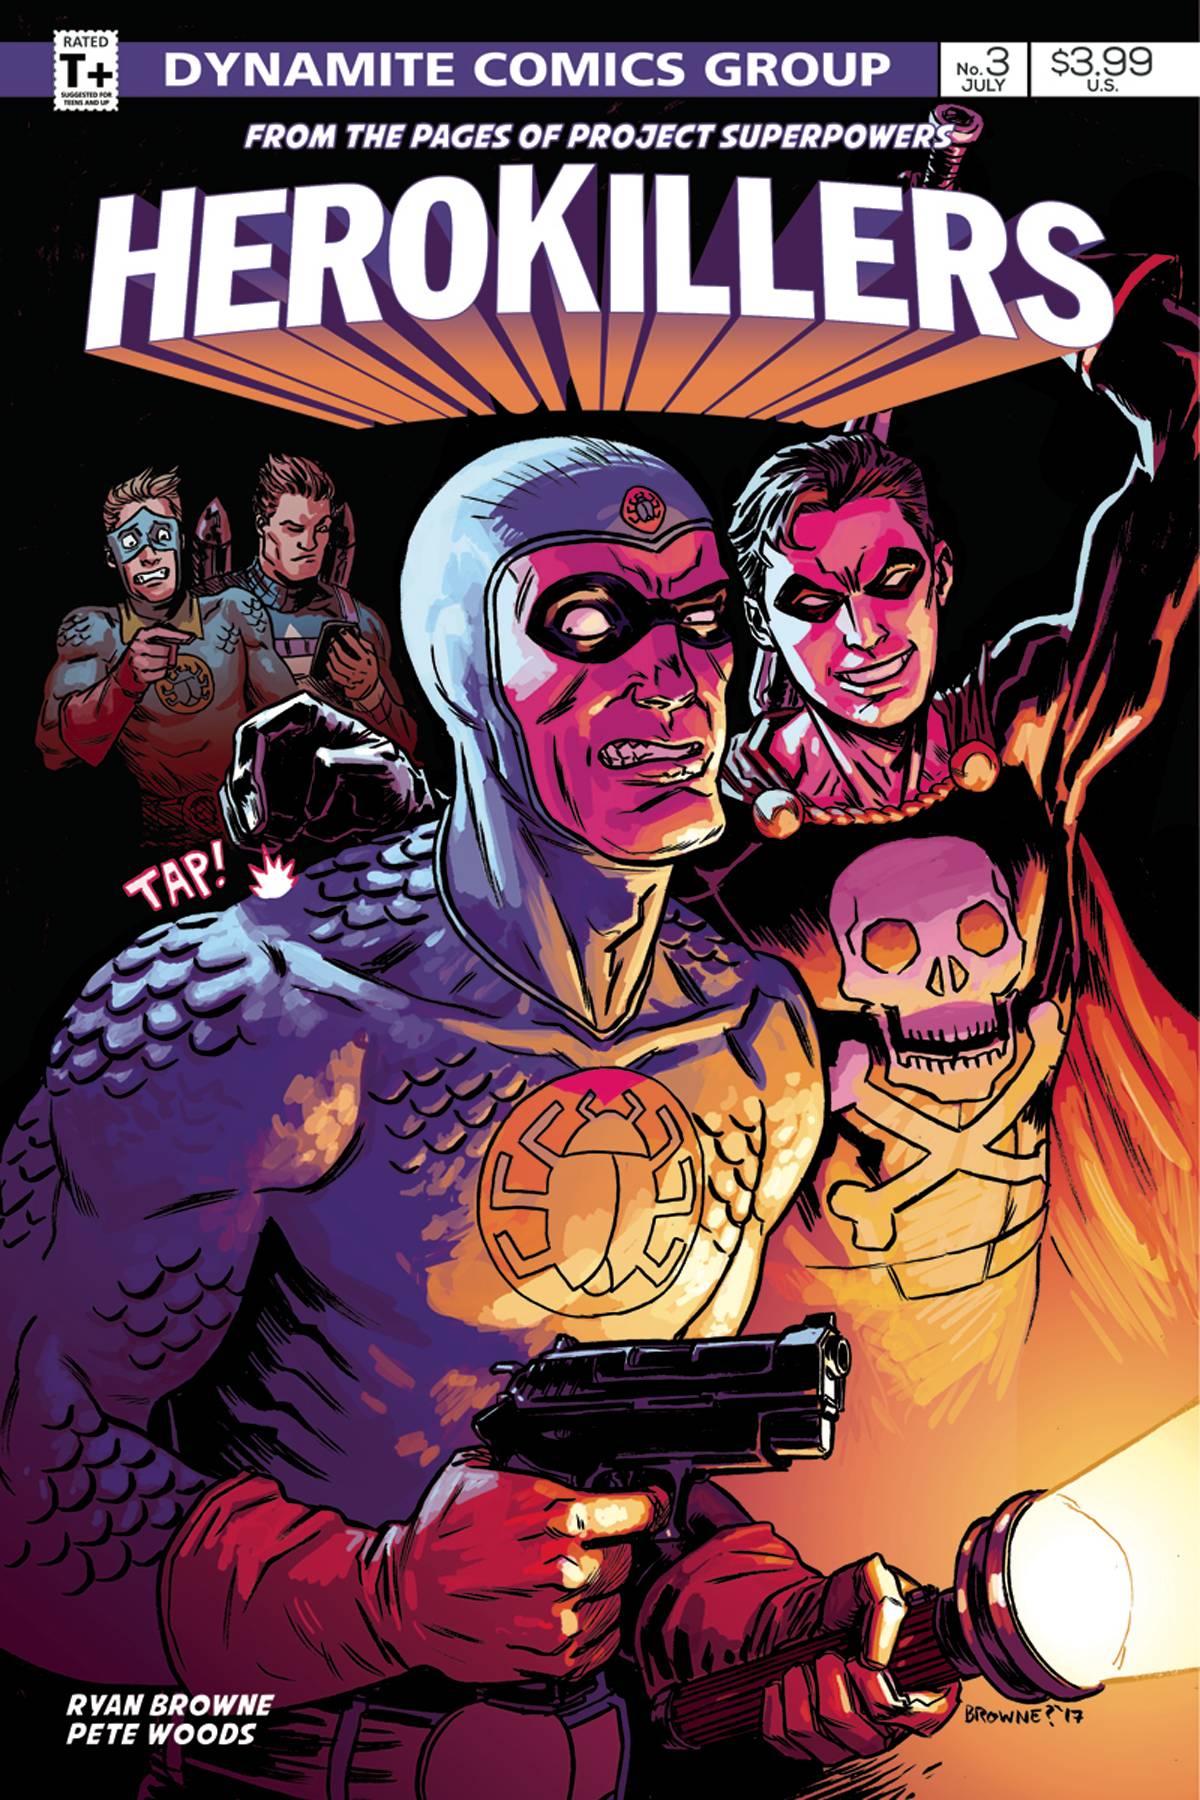 PROJECT SUPERPOWERS: HERO KILLERS#3